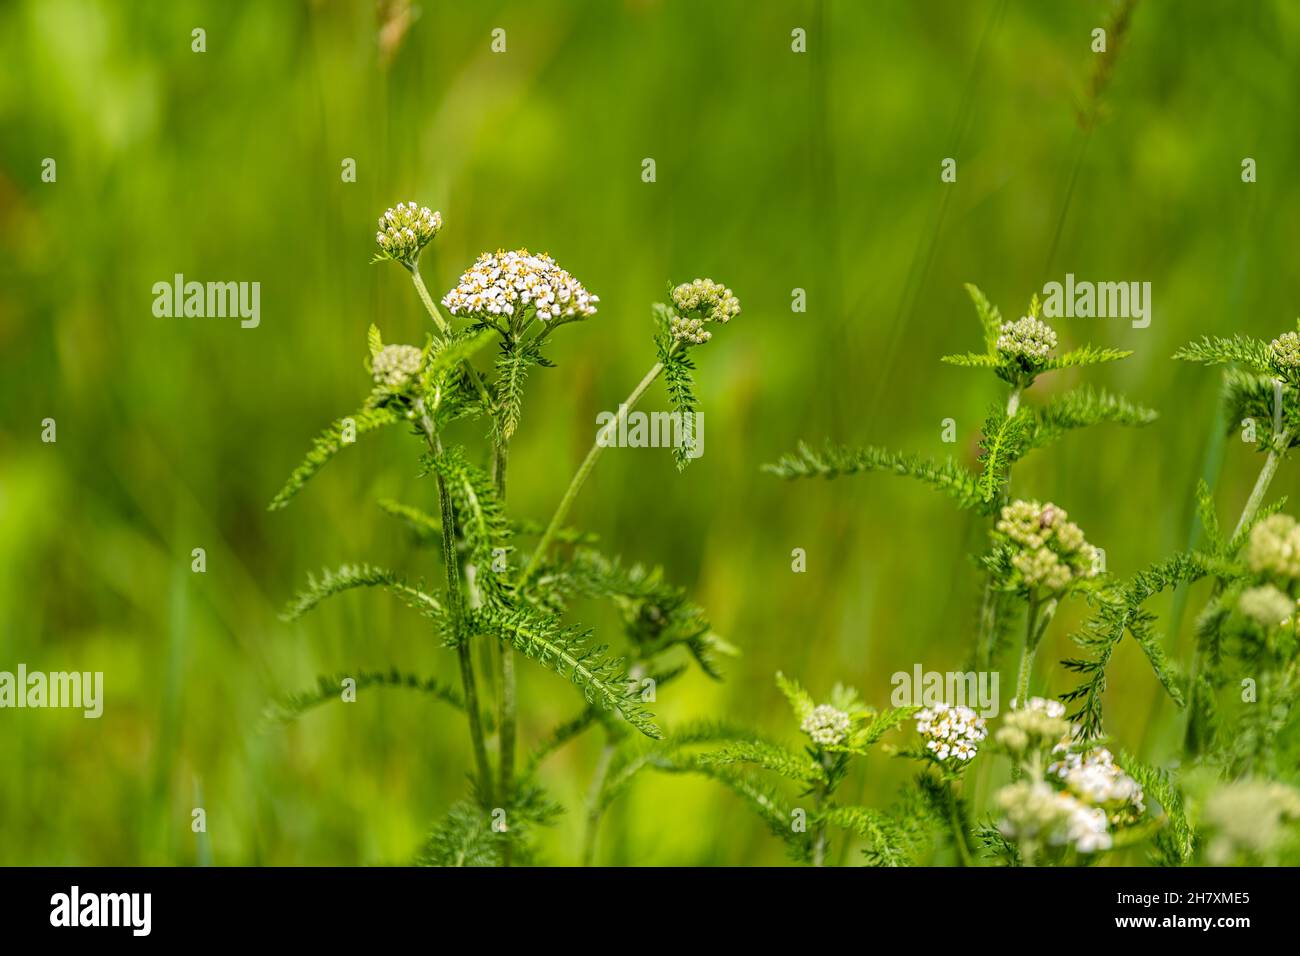 White yarrow wildflowers macro closeup in green lush grass bokeh background showing texture of leaves on hiking trail in Sugar Mountain, North Carolin Stock Photo